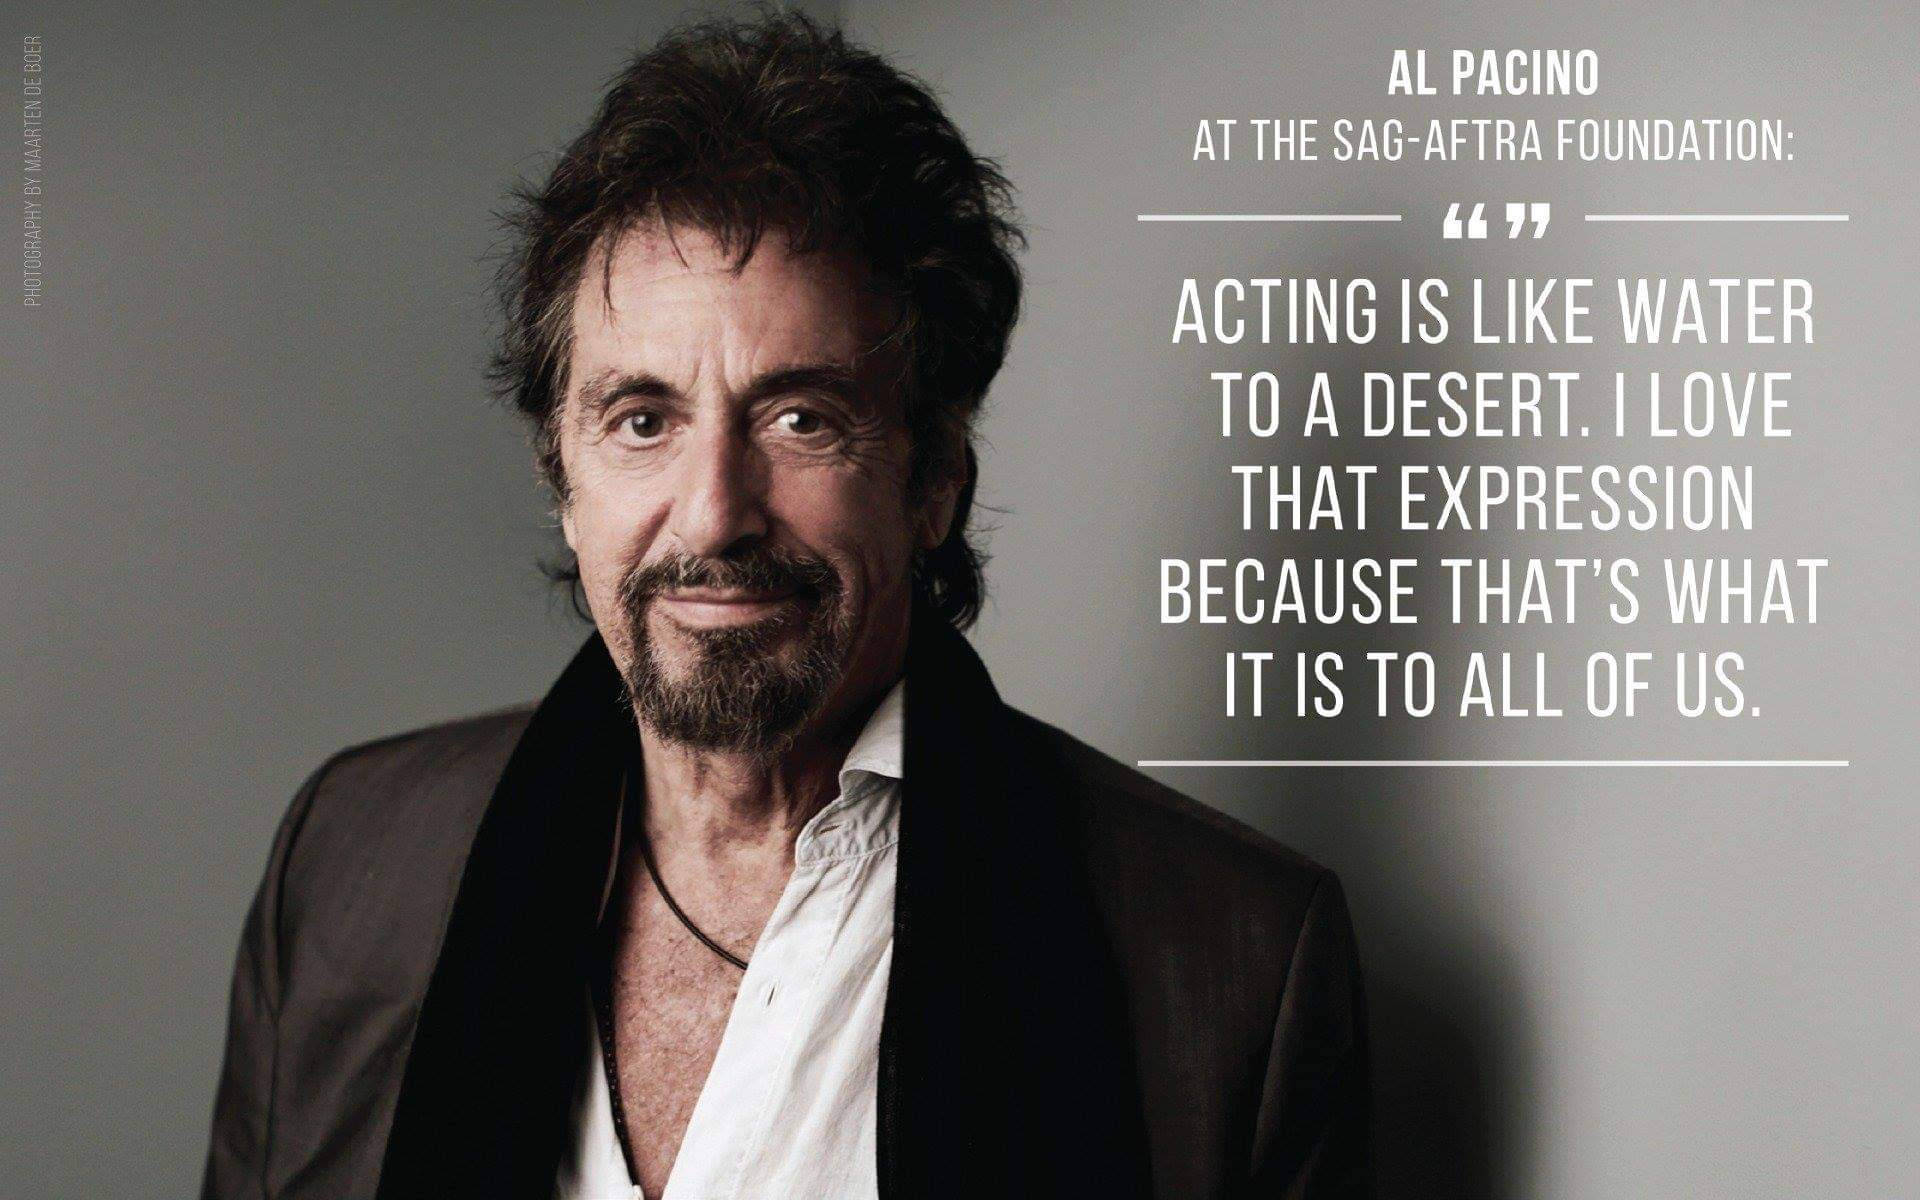 Al Pacino Acting Quotation Background